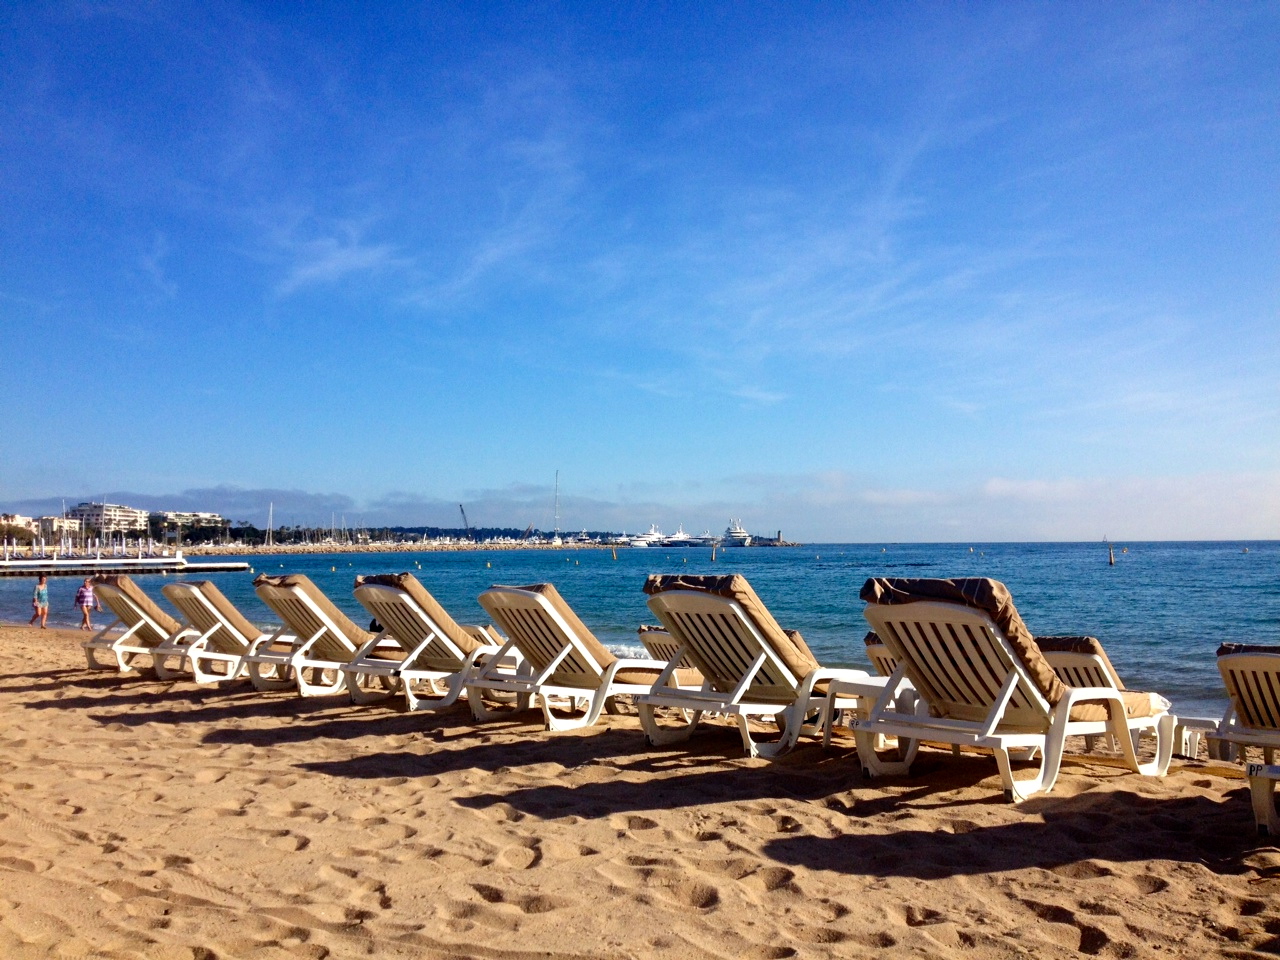 Unlike many of its' Mediterranean counterparts, the beaches in Cannes are all sandy.... no pebbles in sight!